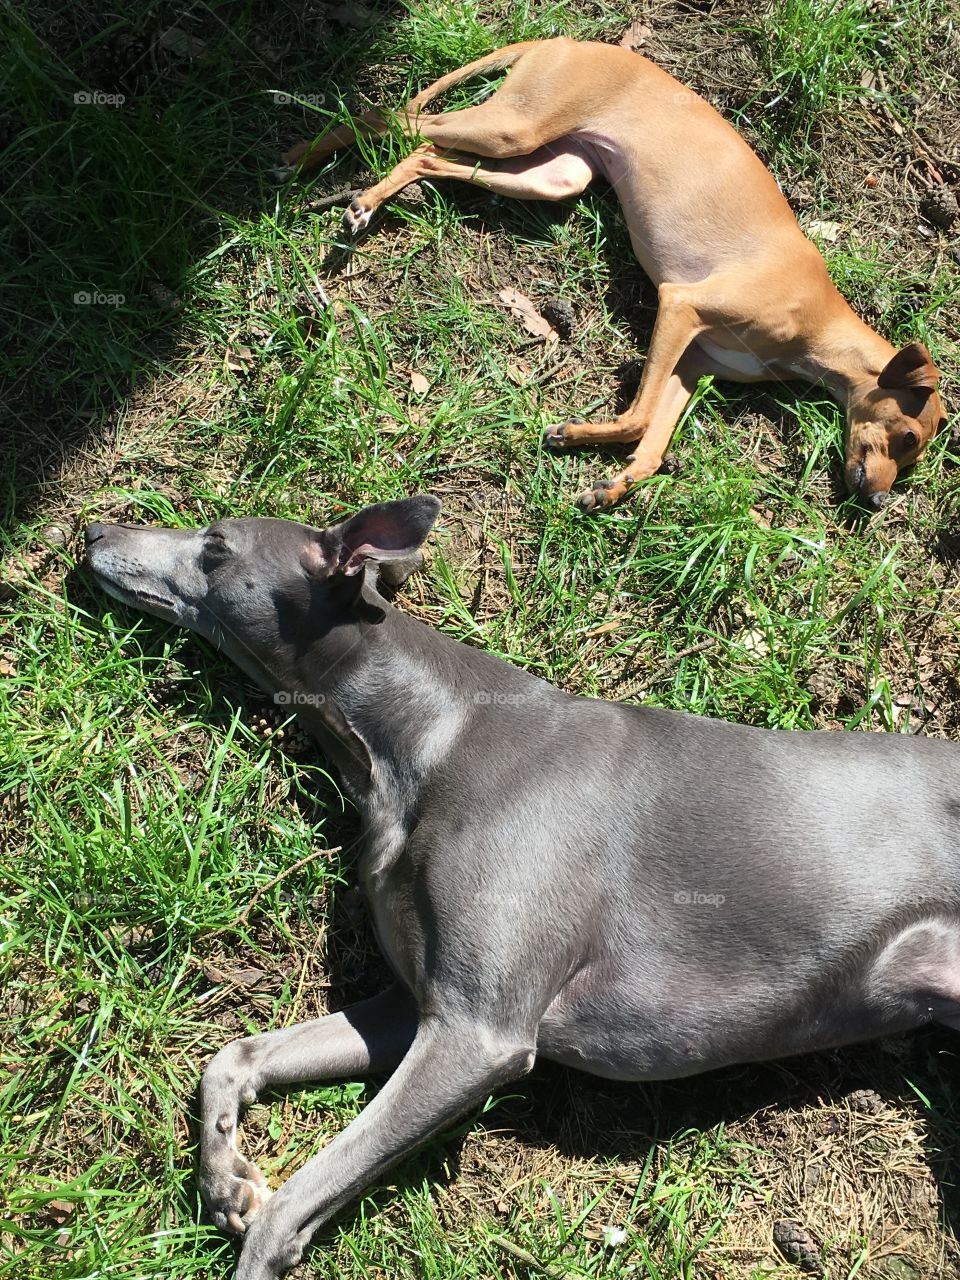 Amber the Italian greyhound and Libby the whippet sunbathing on the lawn under the pine trees asleep